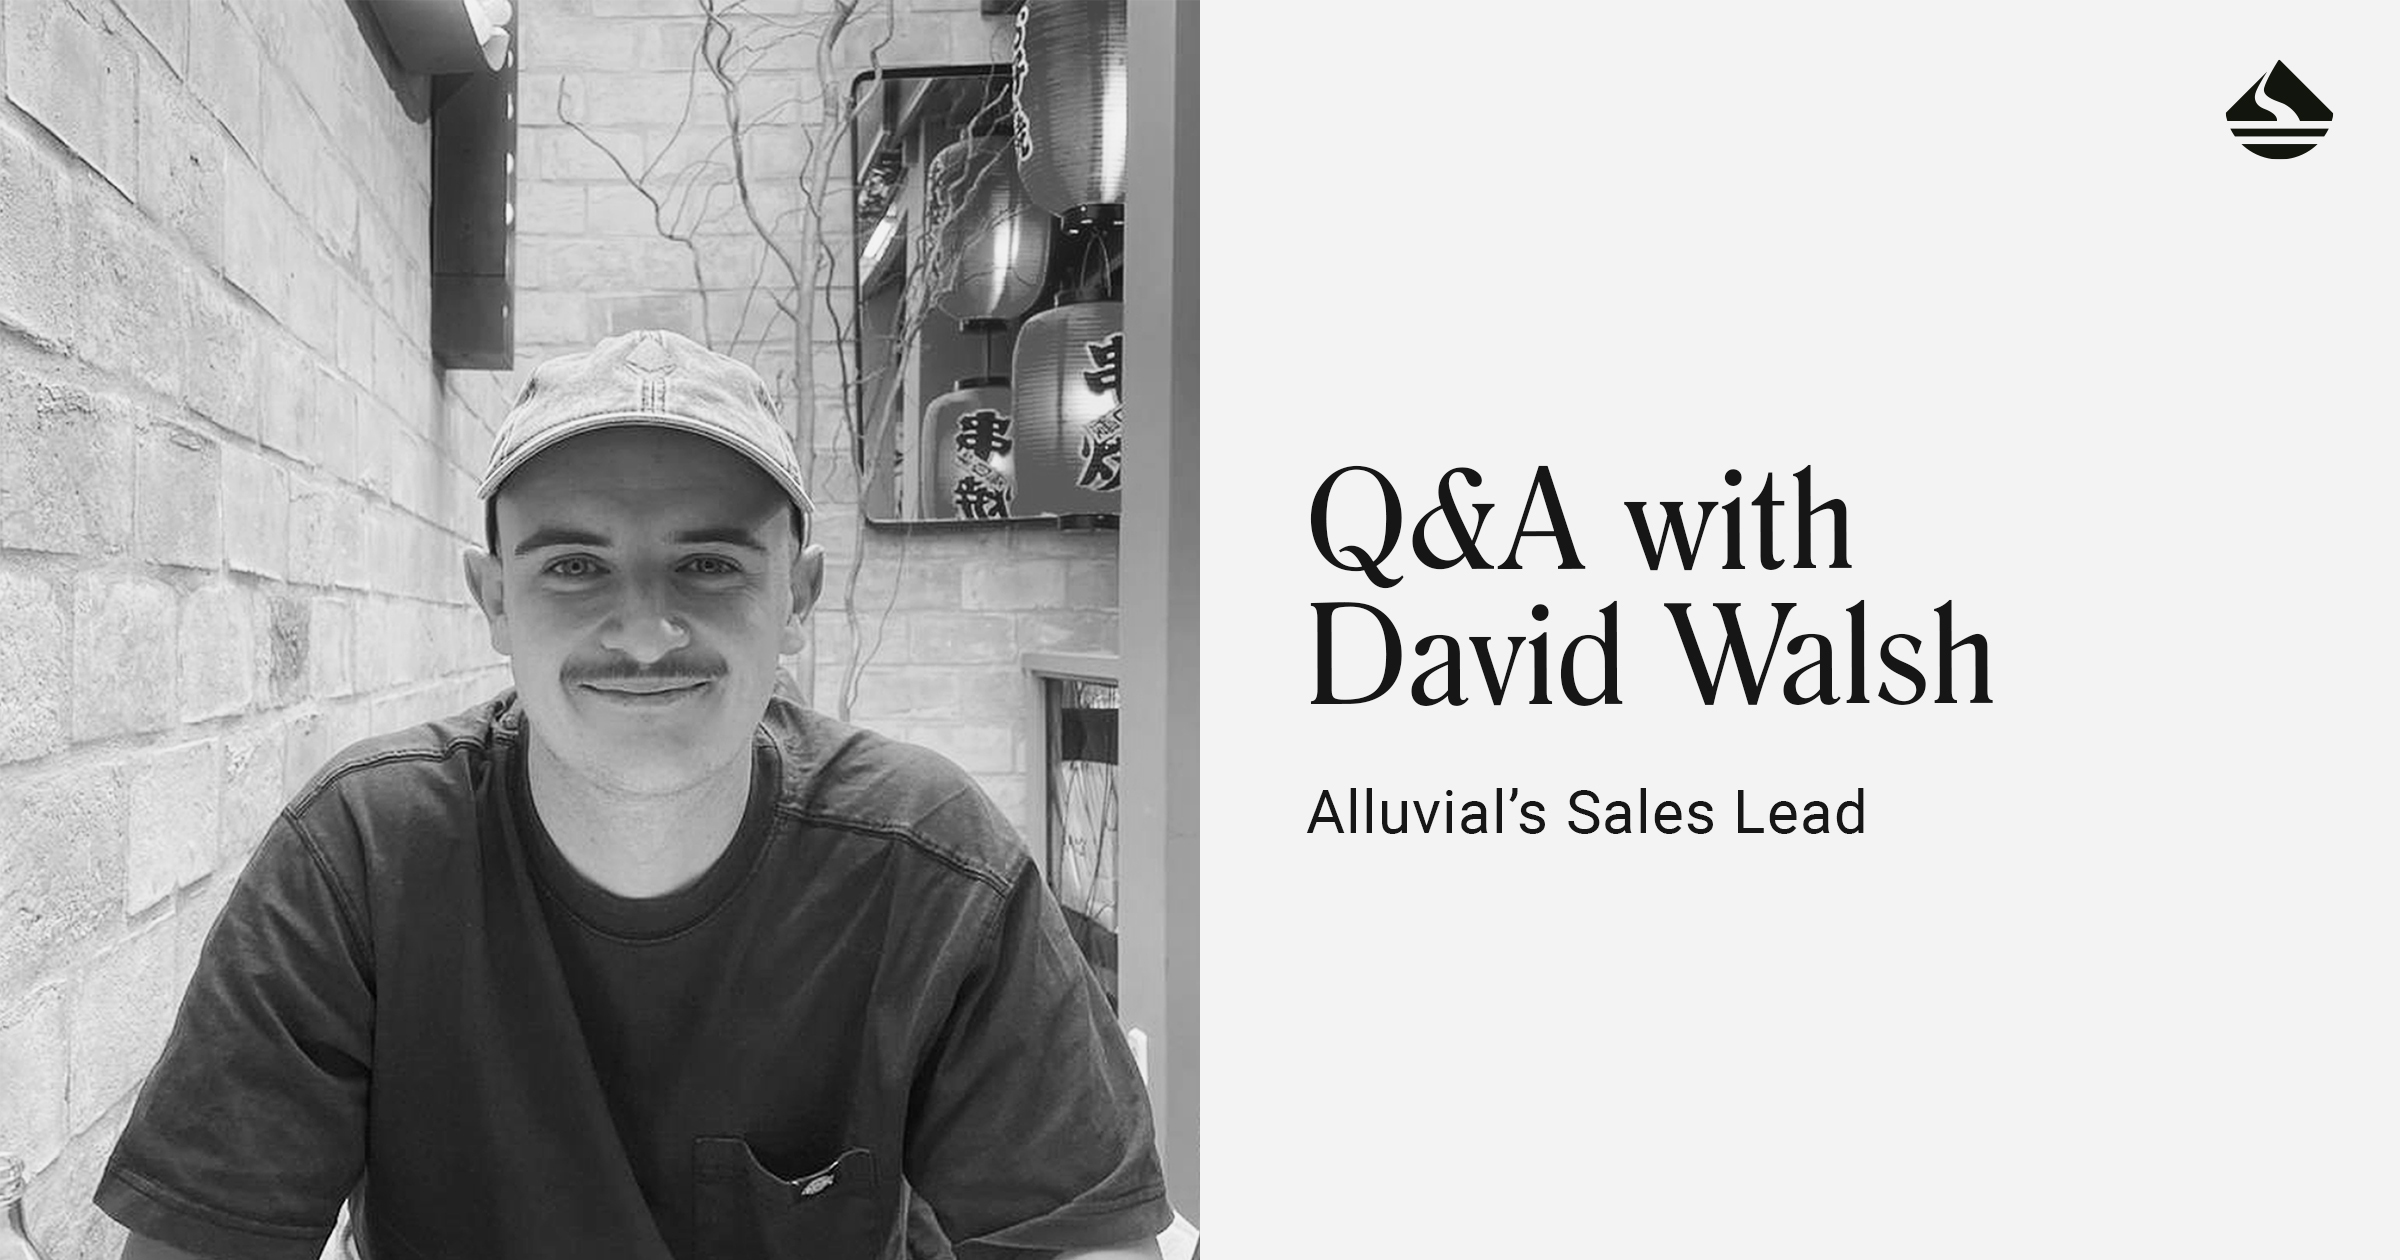 Q&A with David Walsh, Alluvial’s Sales Lead